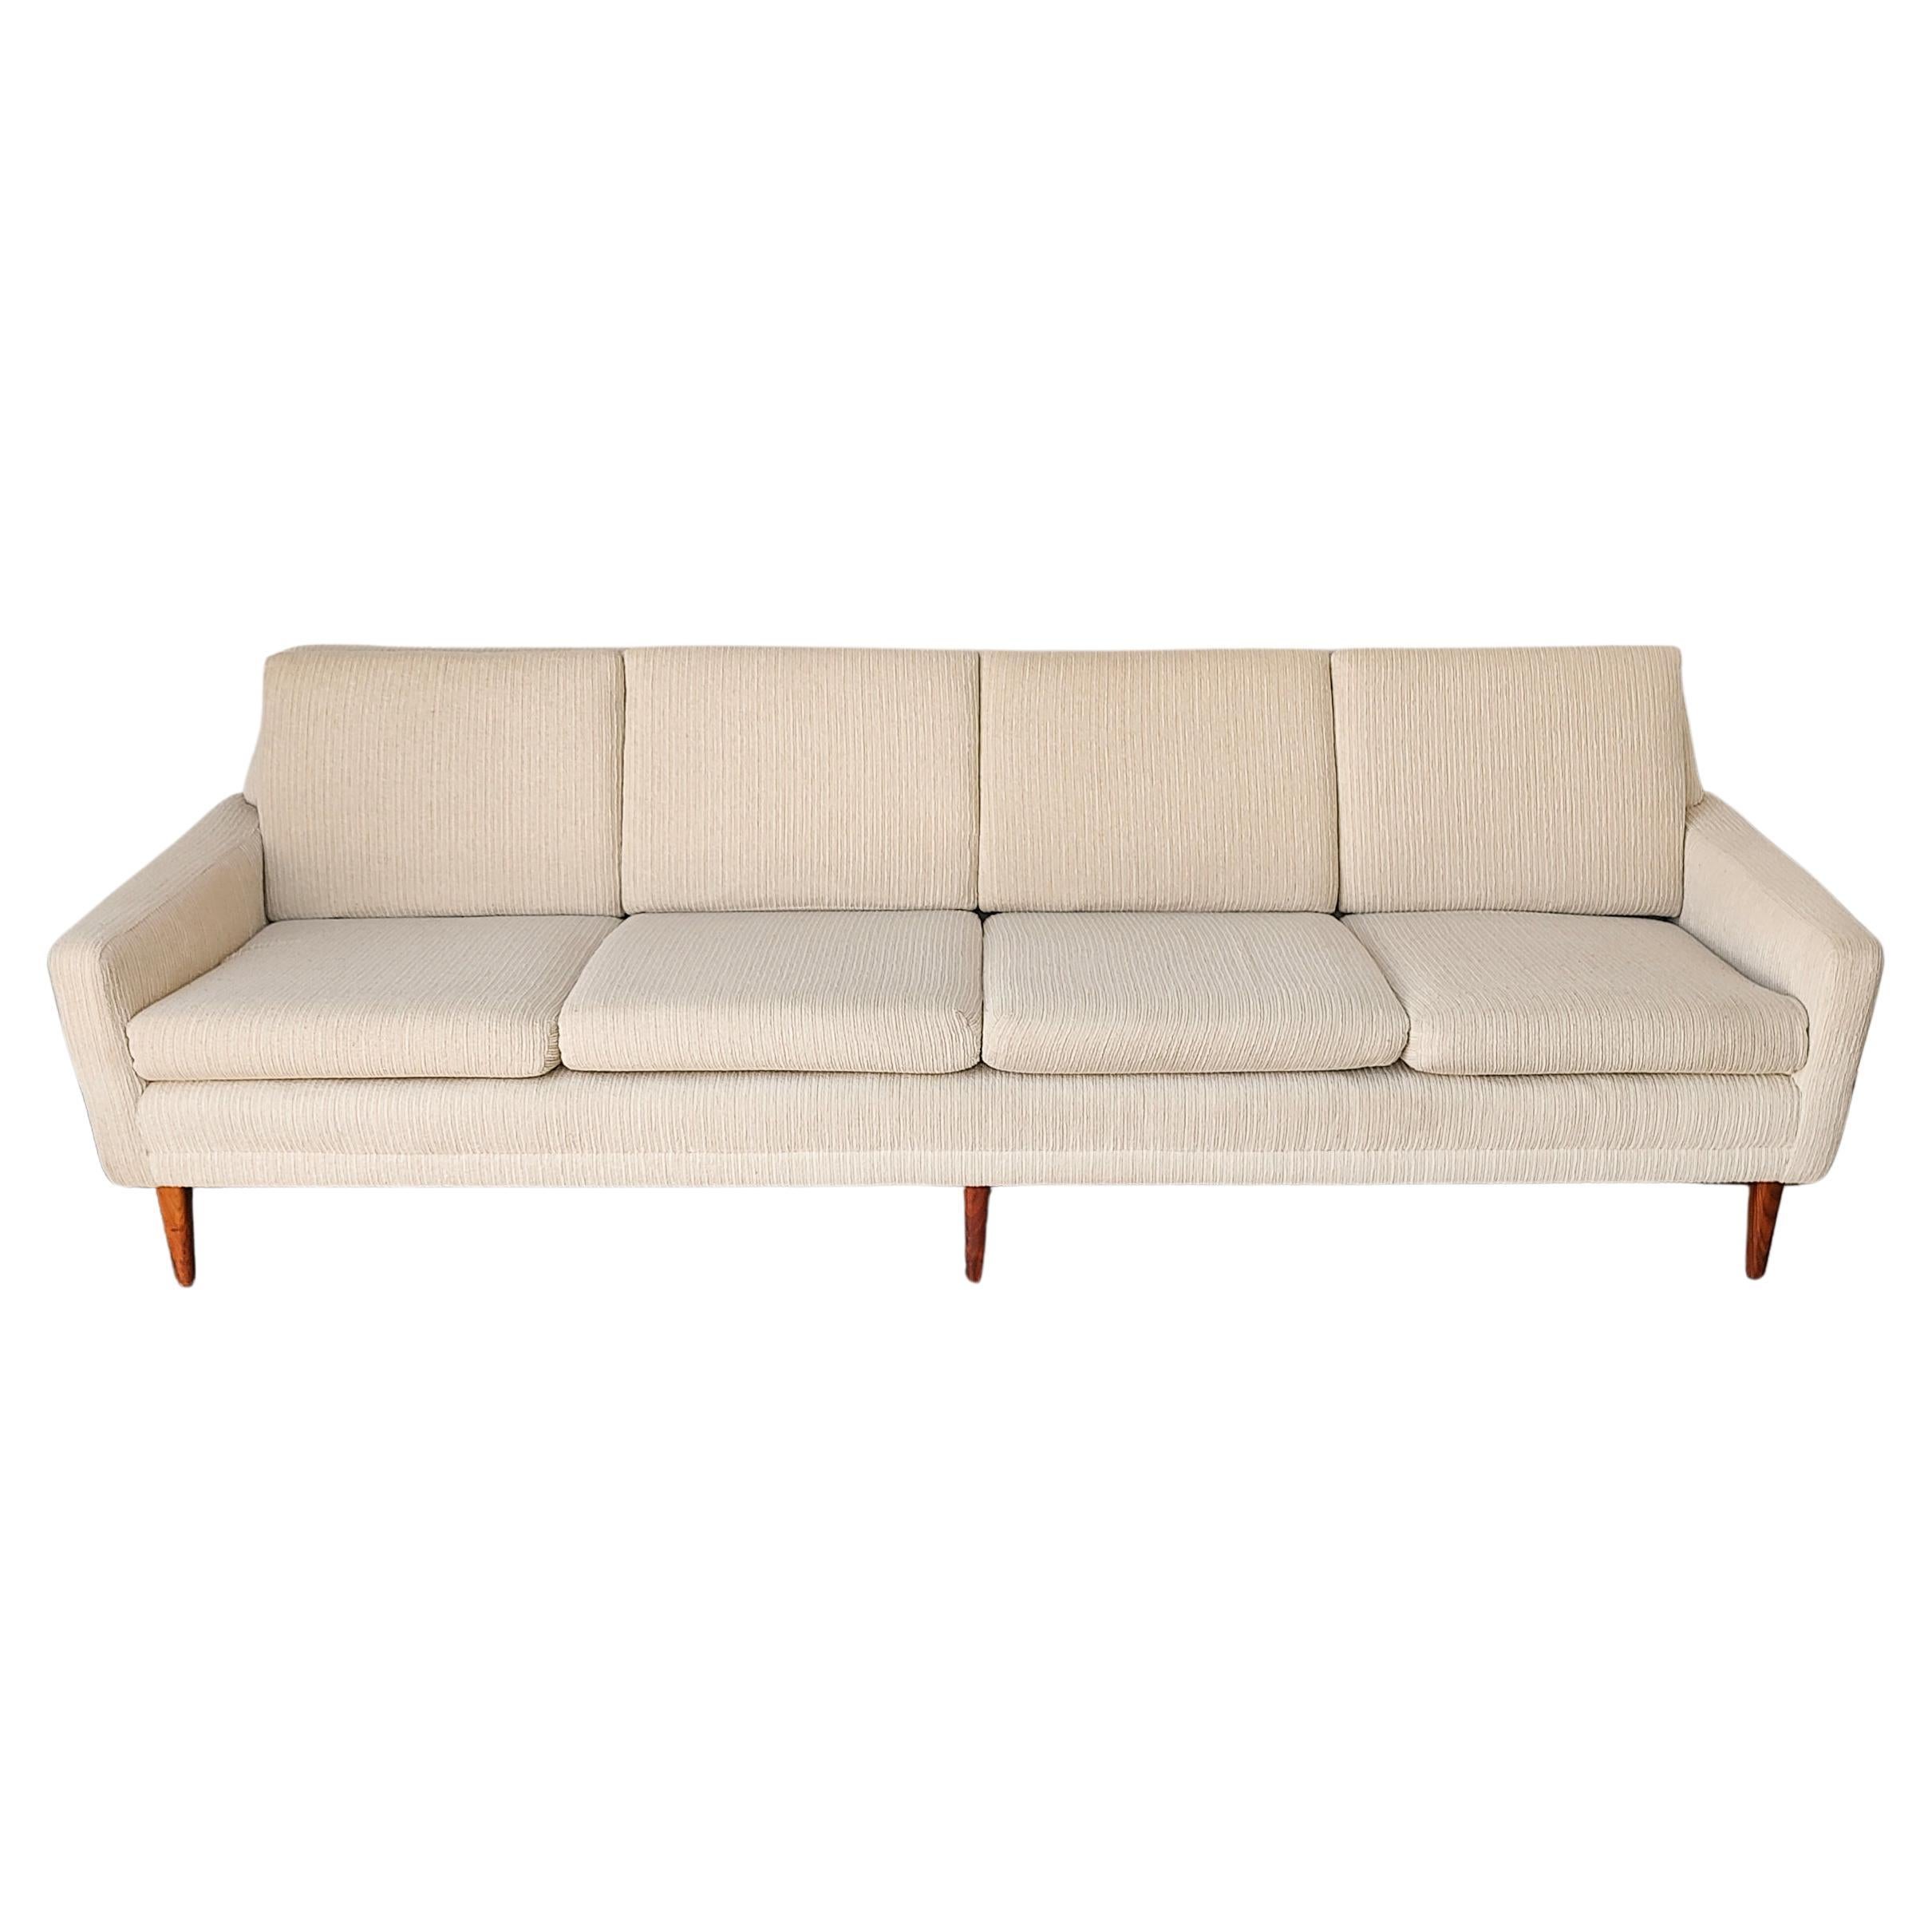 1960s White Four-Seater Sofa by Dux For Sale